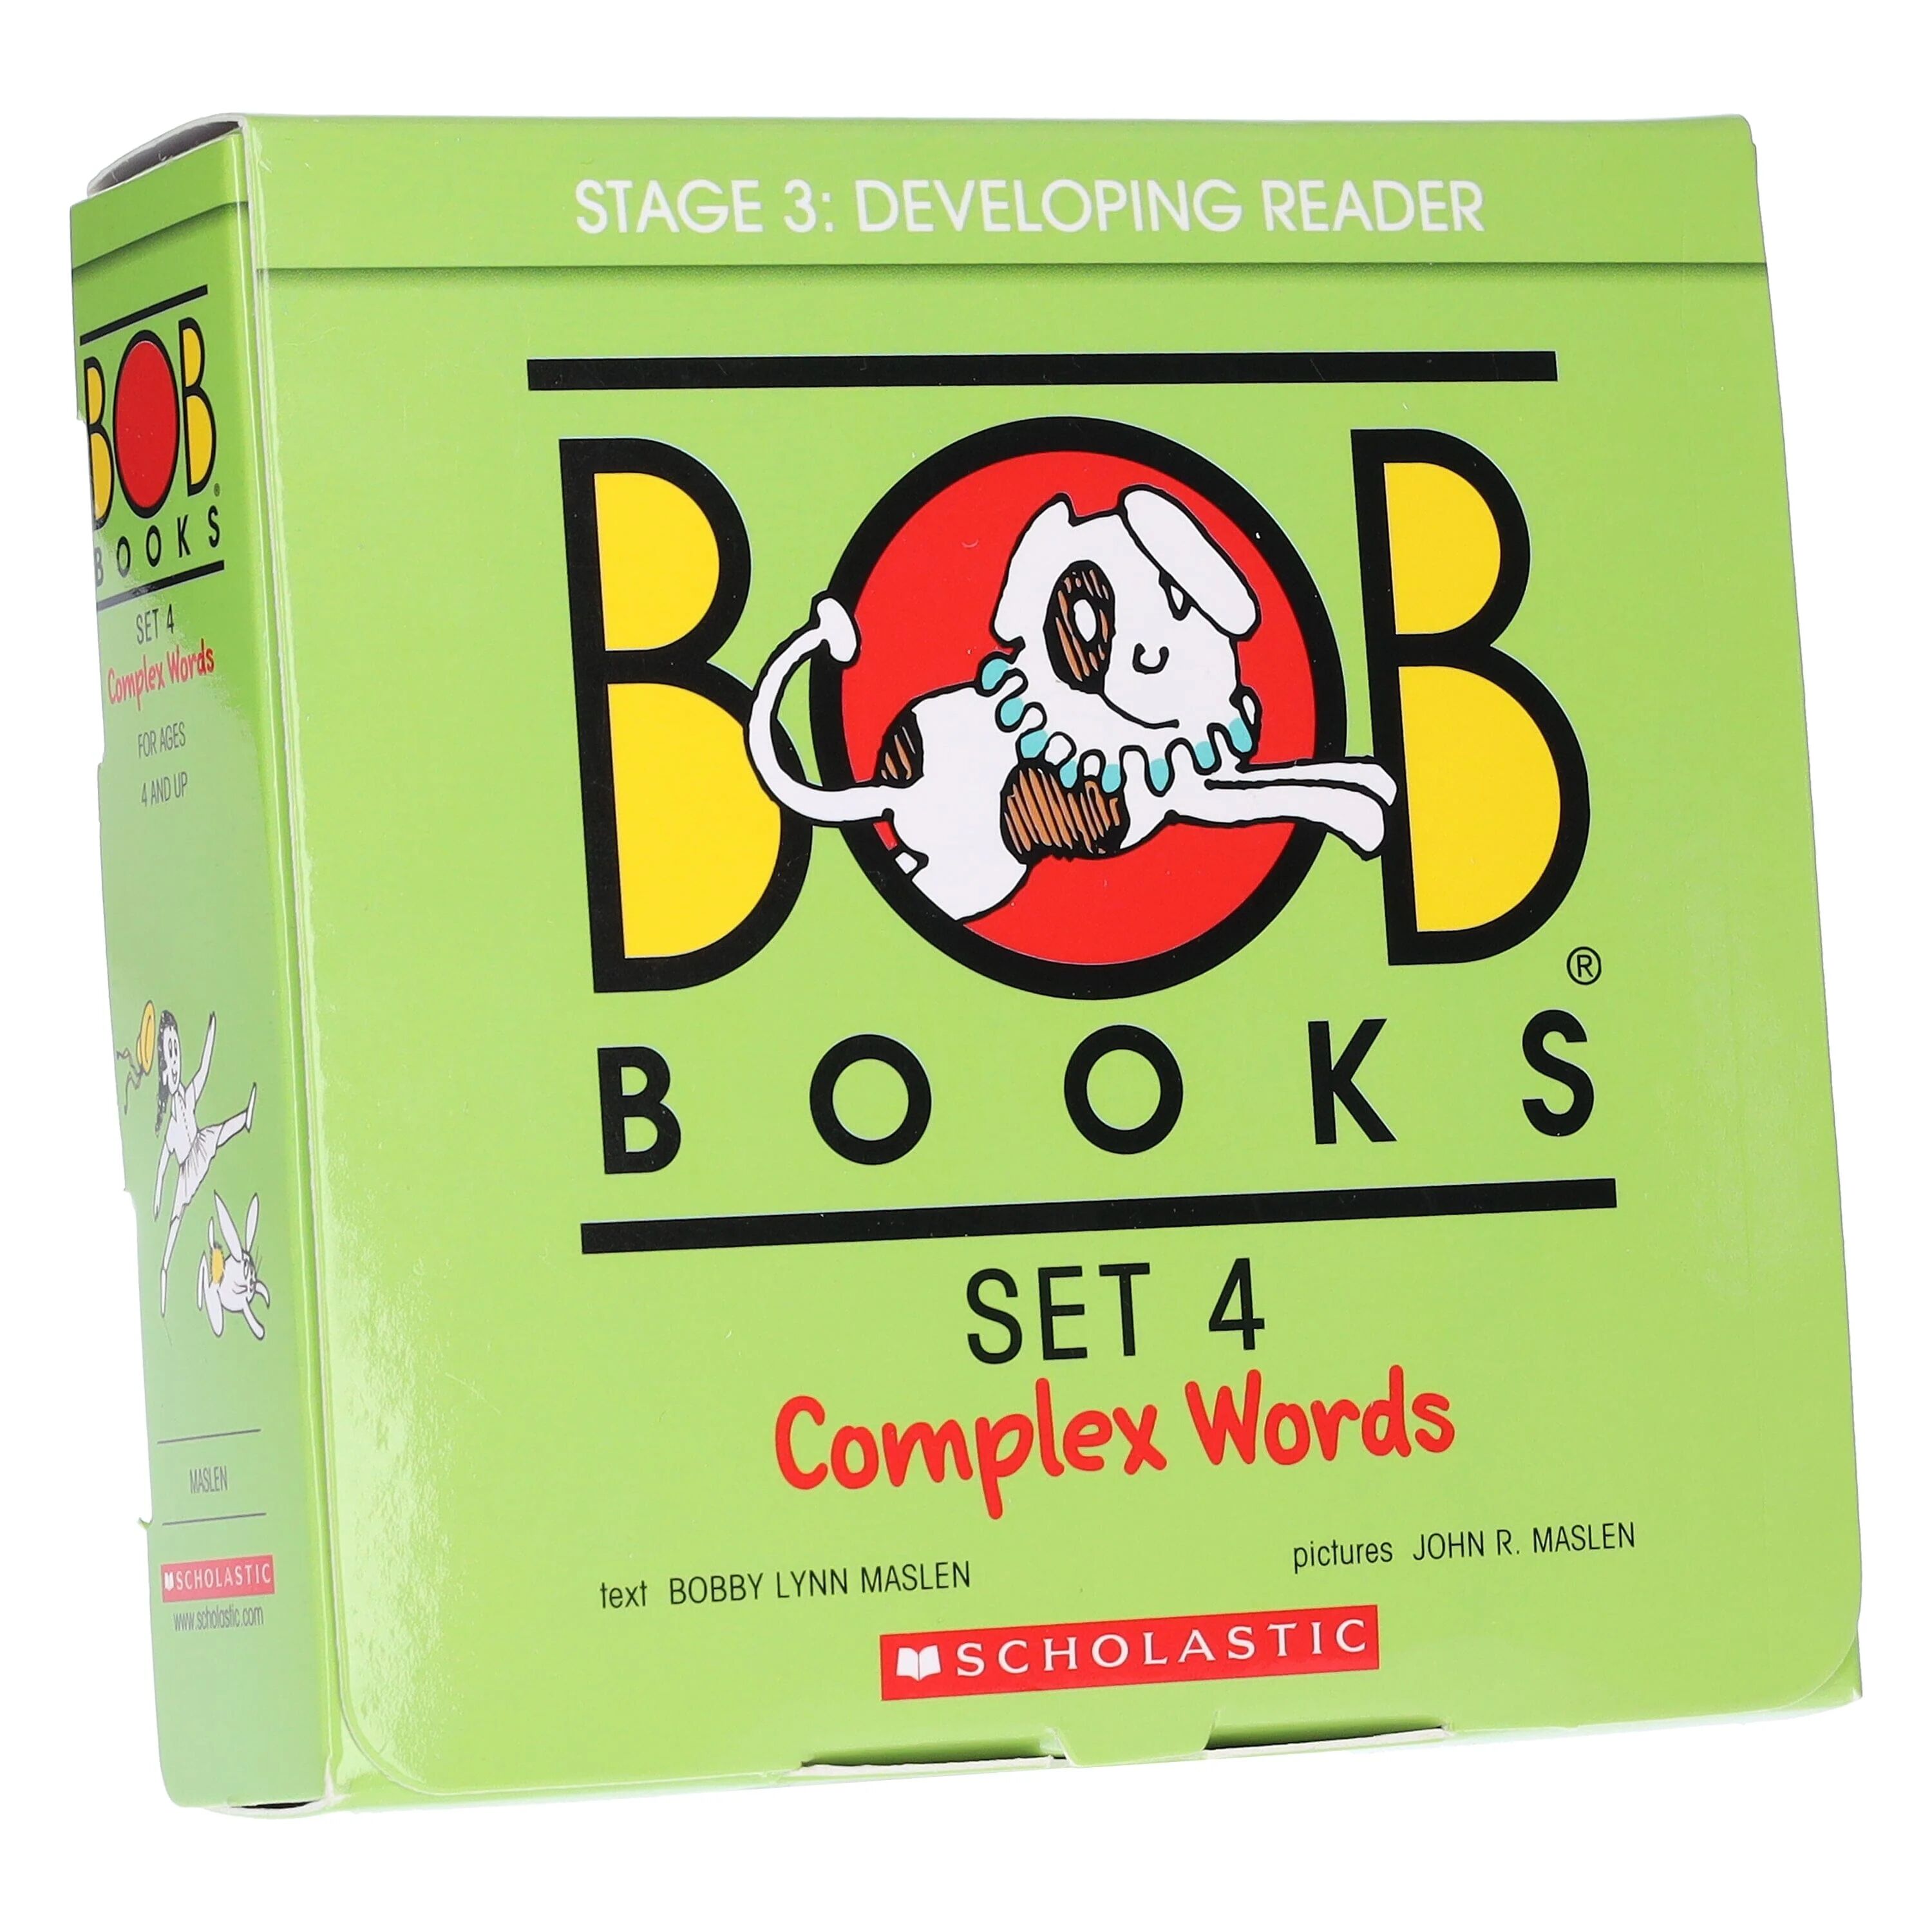 Bob Books Set 4: Complex Words (Stage 3: Developing Reader) 8 Books Collection Set - Ages 4+ - Paperback Scholastic